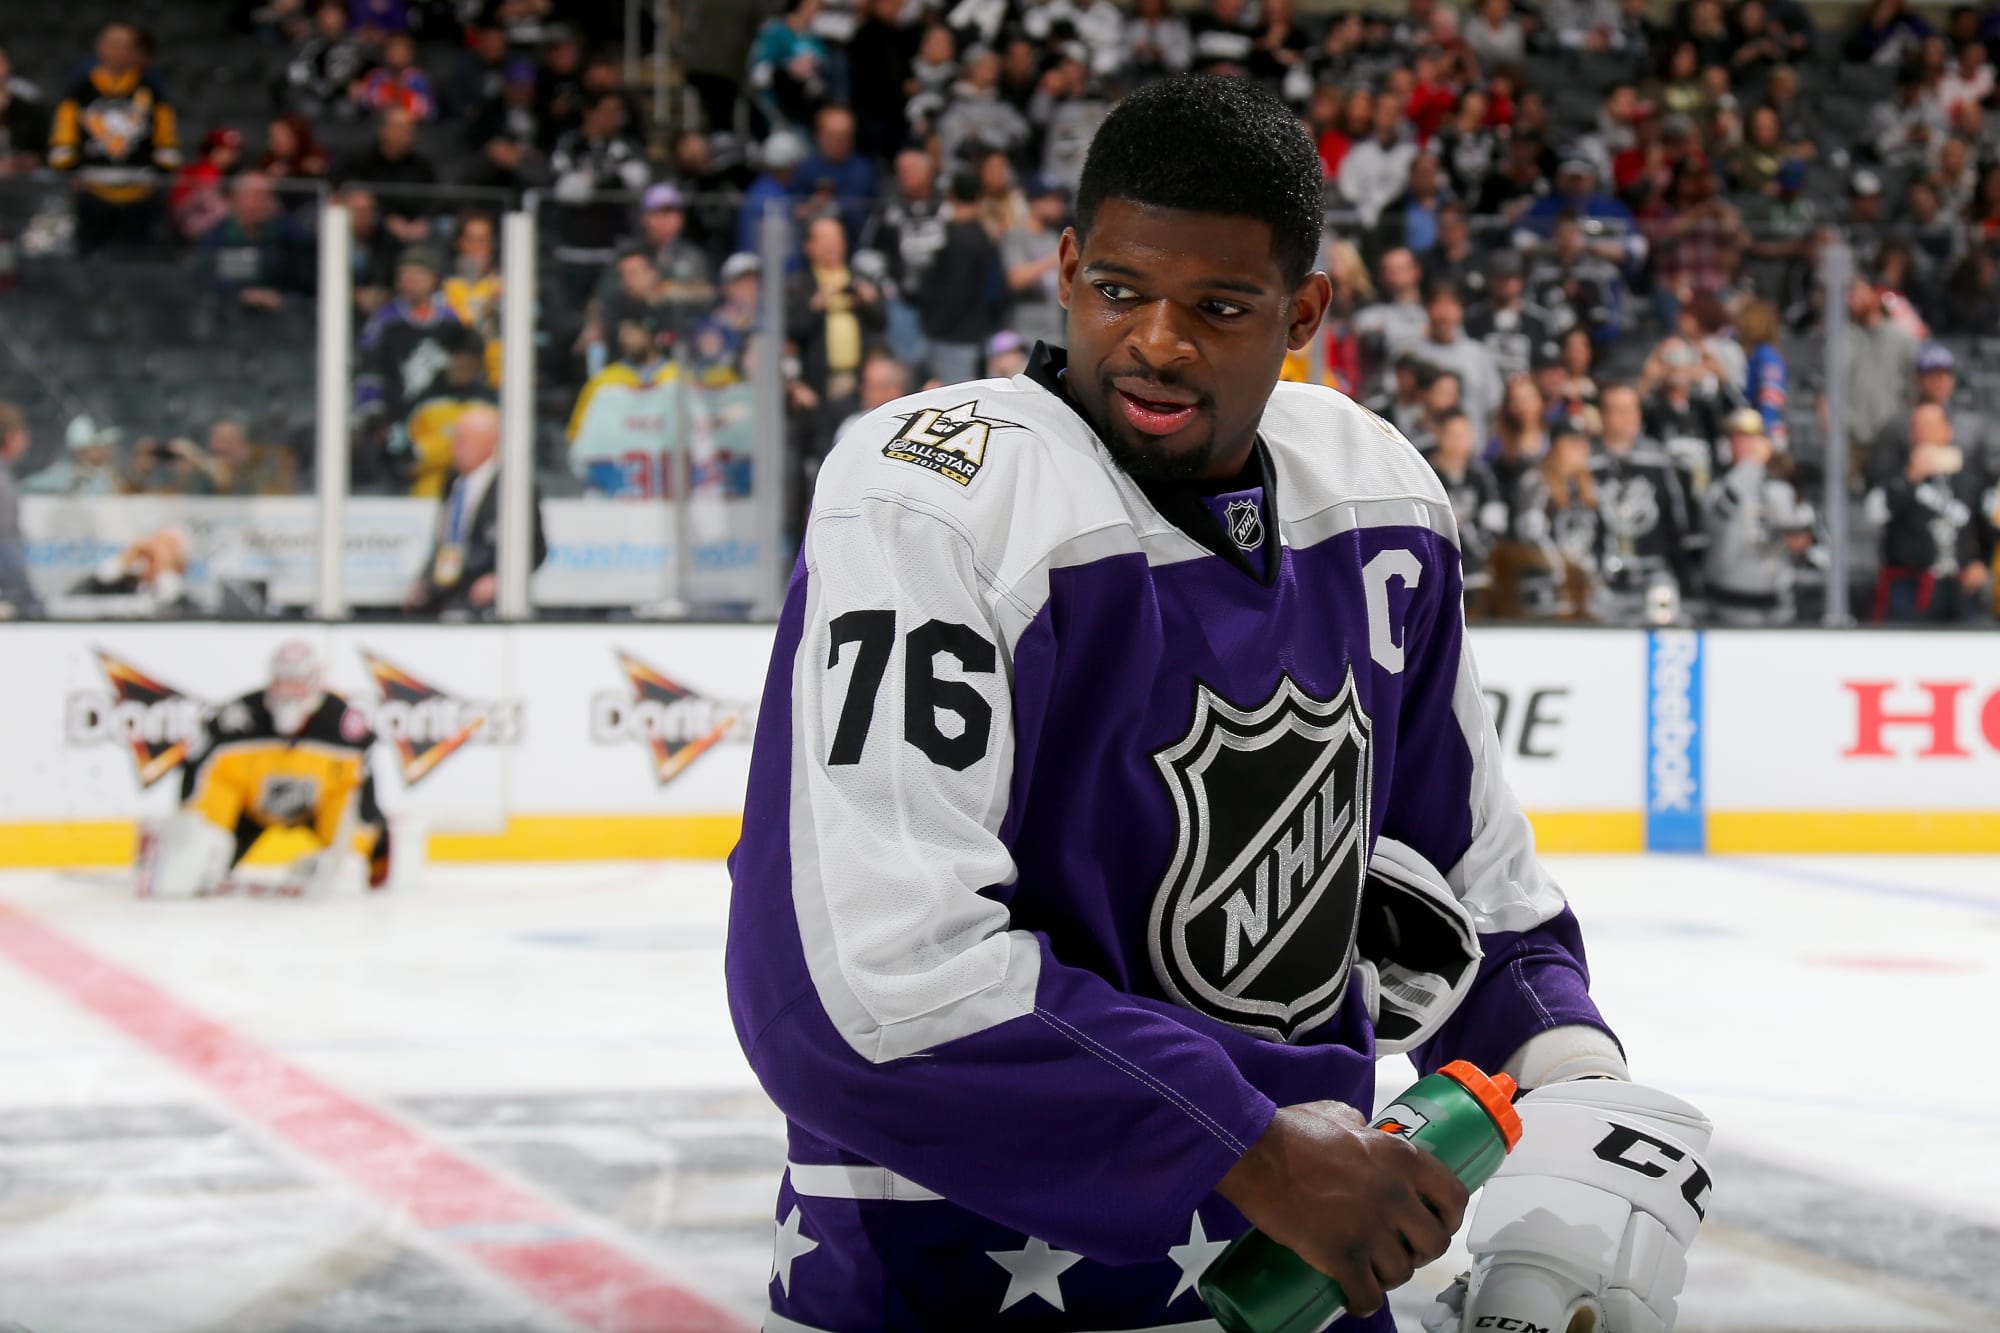 Stanley Cup: Five Things to Know About Hockey Star P.K. Subban